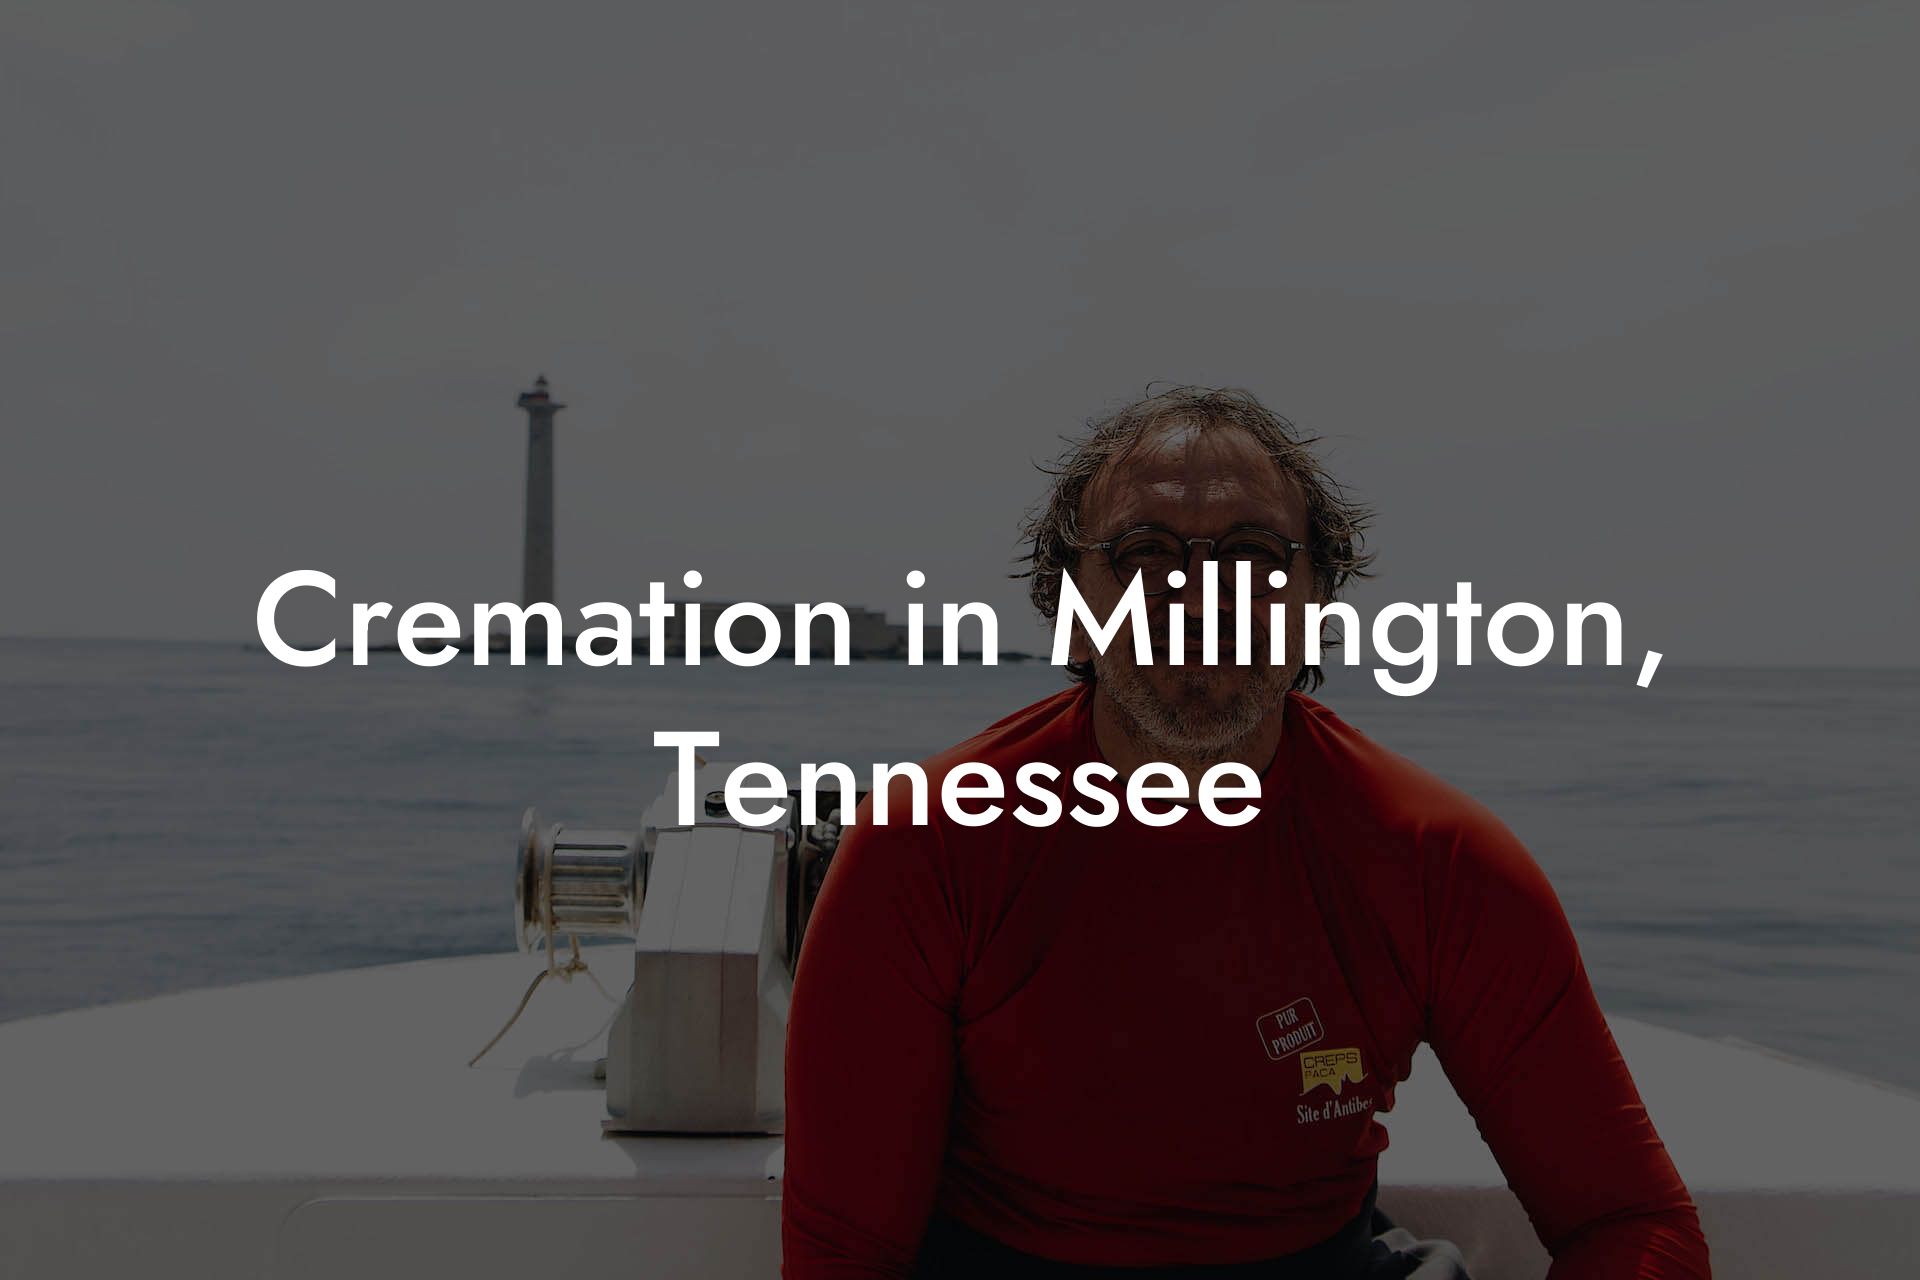 Cremation in Millington, Tennessee